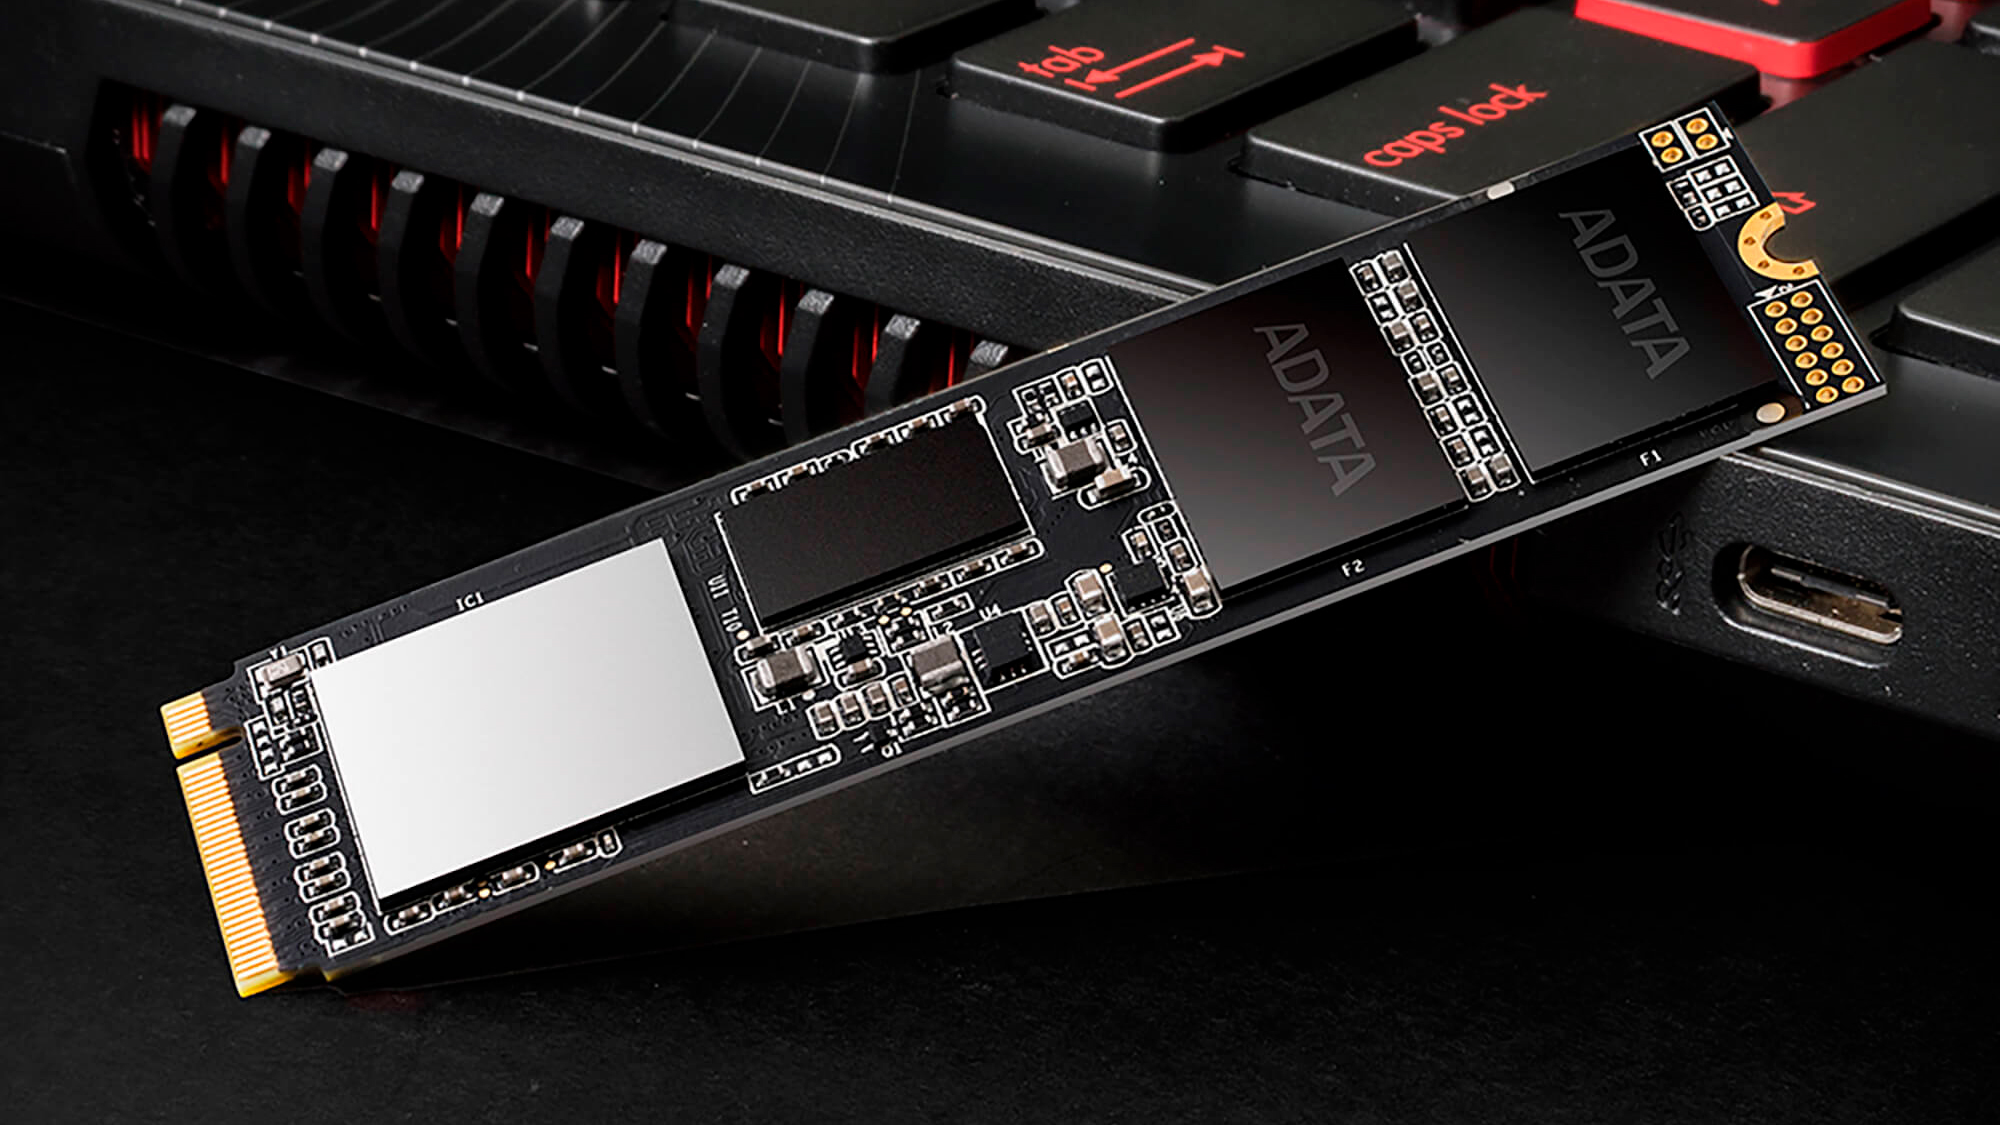 adata-switches-nand-on-xpg-sx8200-pro-ssd-again,-affecting-performance